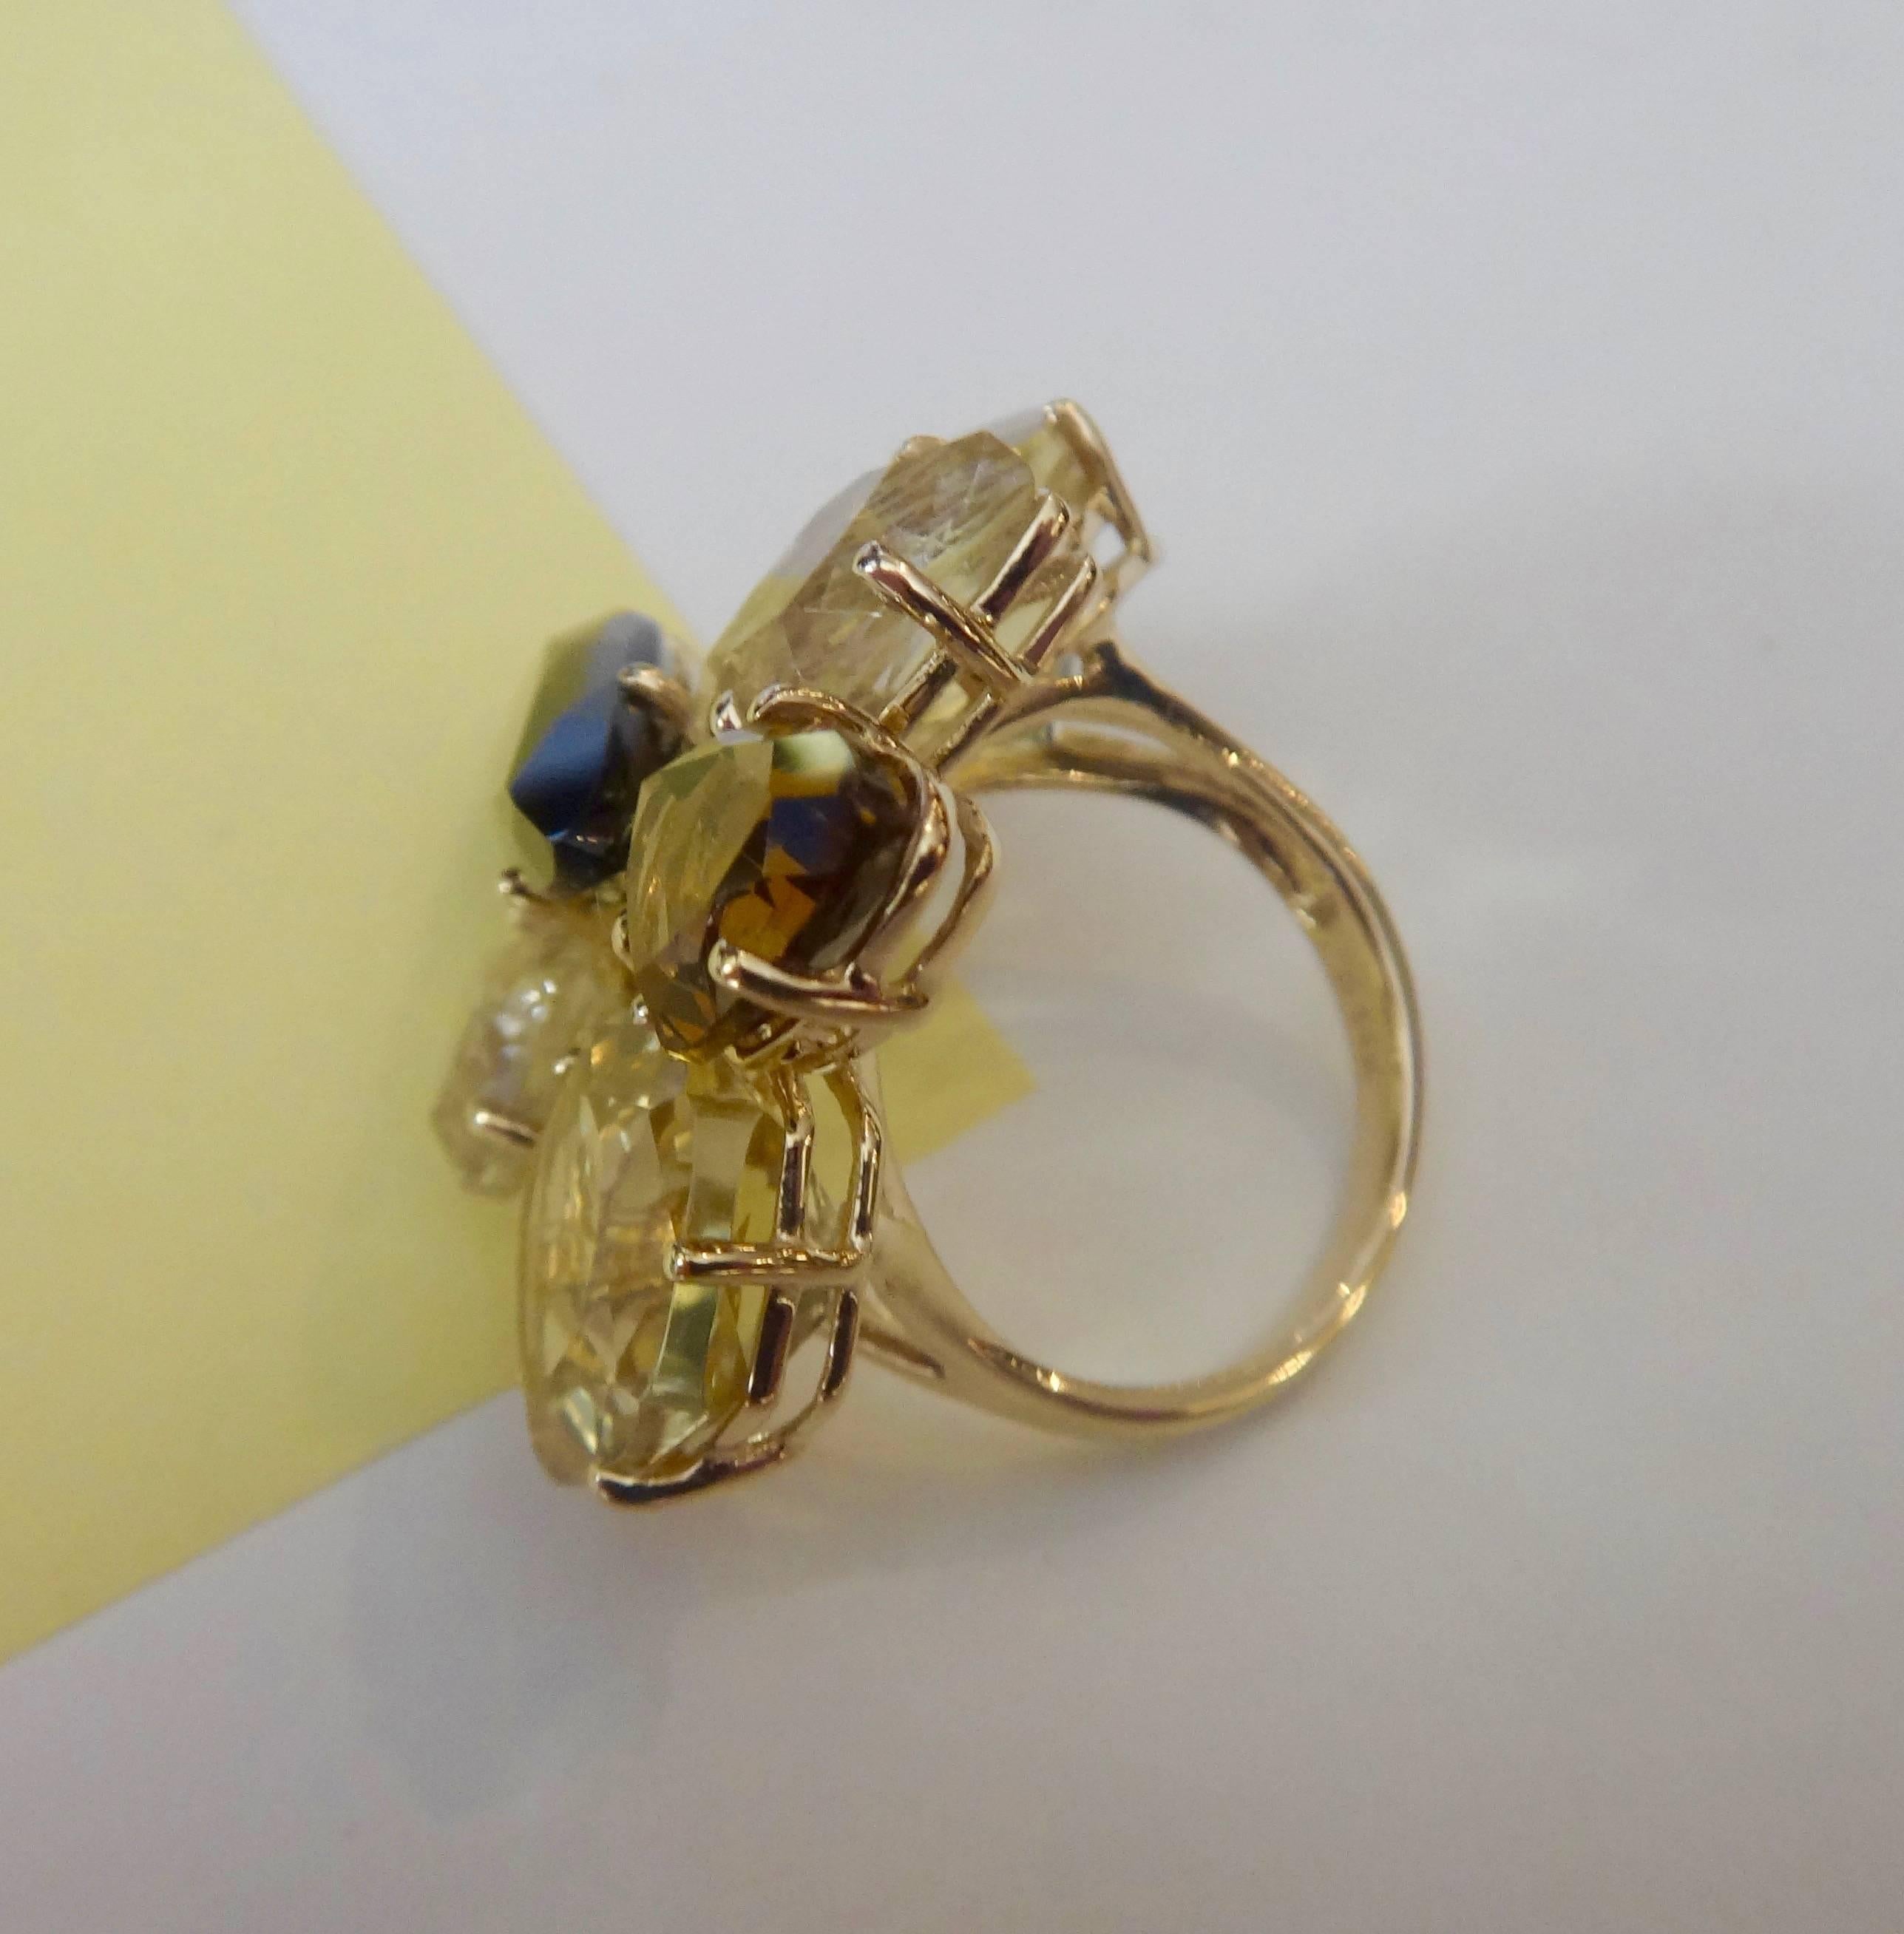 Autumnal colors of yellows and browns in six free form shaped gems of lemon citrine, rutilated and smokey quartz are clustered together in this dramatic cocktail ring.  All prong set in 14k yellow gold.  Ring size 7 and may be easily sized.